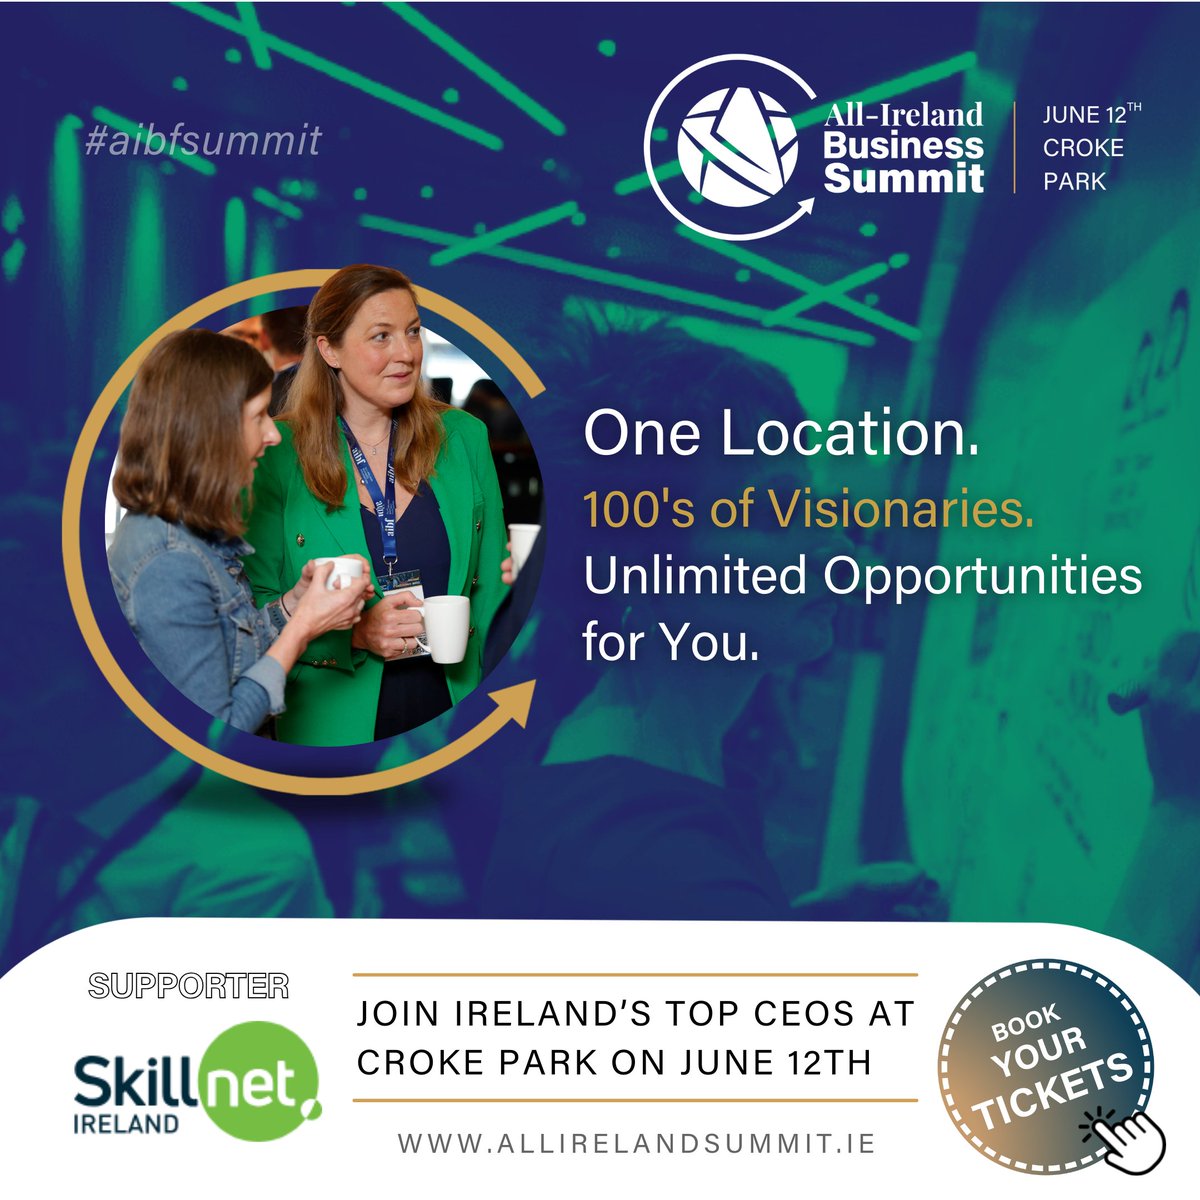 Keen to upskill and develop your talents? Check out Skillnet Ireland who we’re delighted to have on board as a Supporter and exhibitor in Croke Park on June 12th. 📈🤝 Find out More:👉🏻allirelandsummit.com @SkillnetIreland #aibfsummit #BusinessAllStars #Training